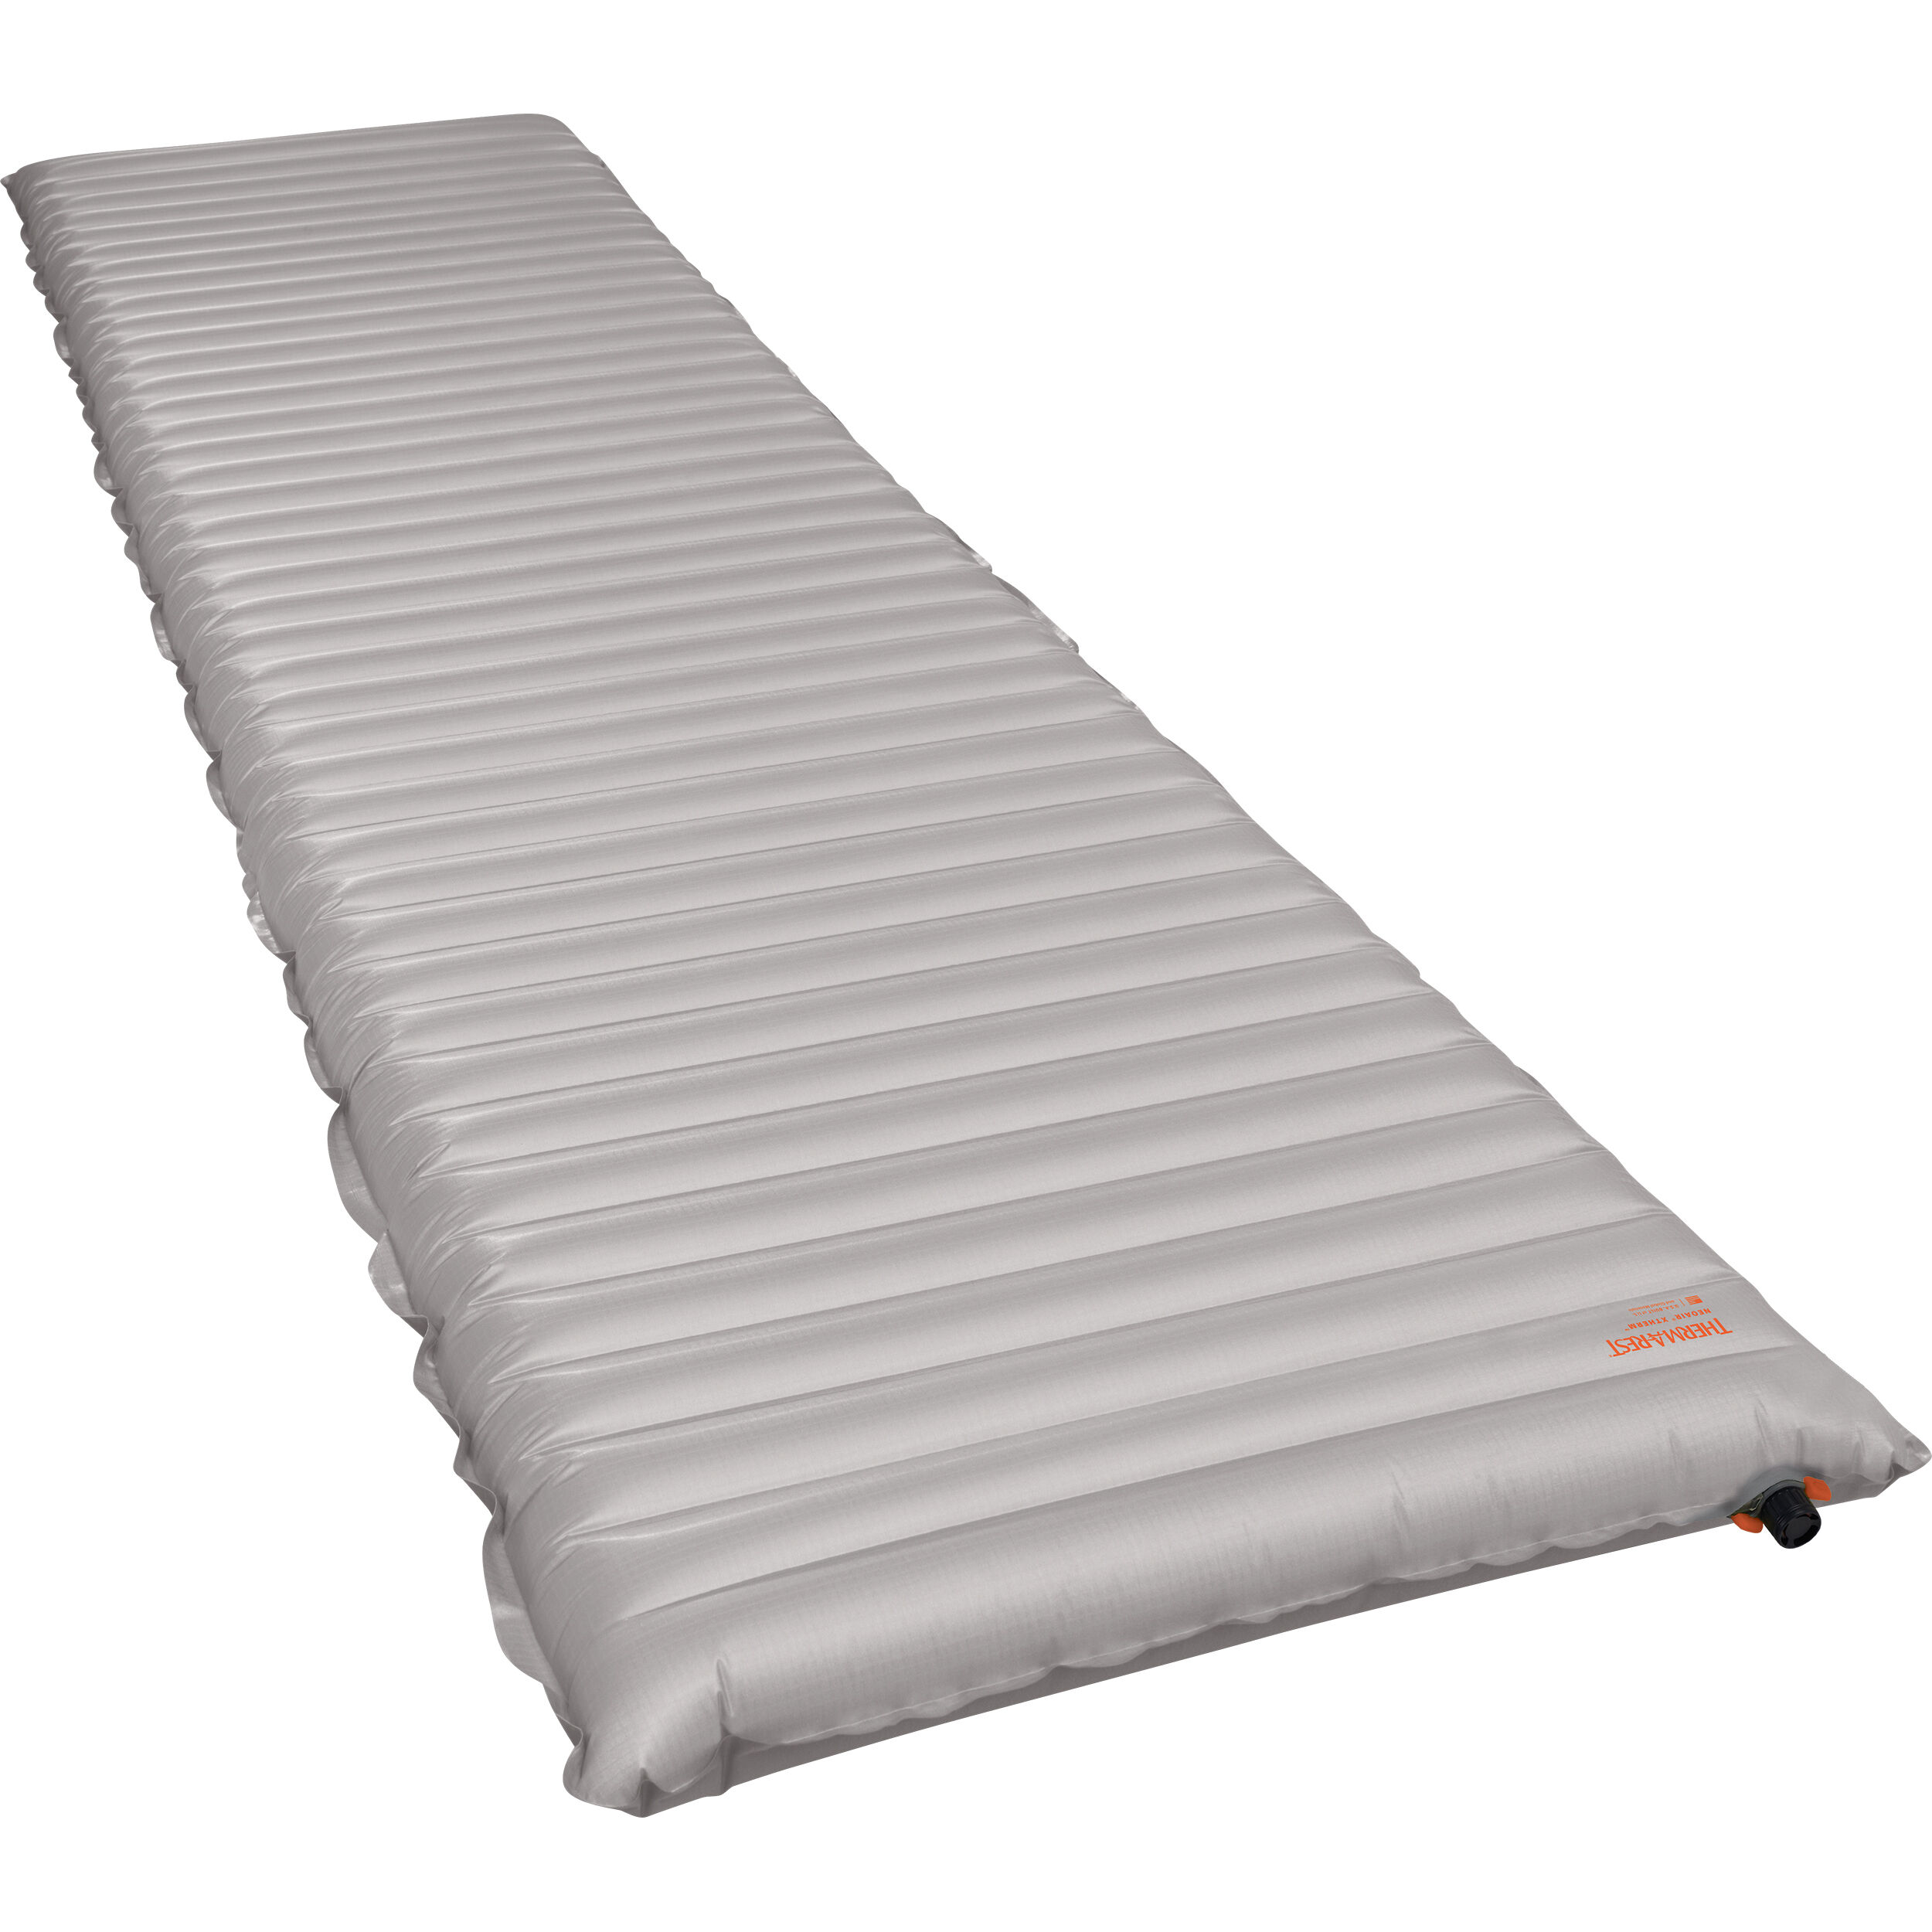 Thermarest roll mat therm-a-rest 'the world's finest camping mattress' ser.1001927 orange. 